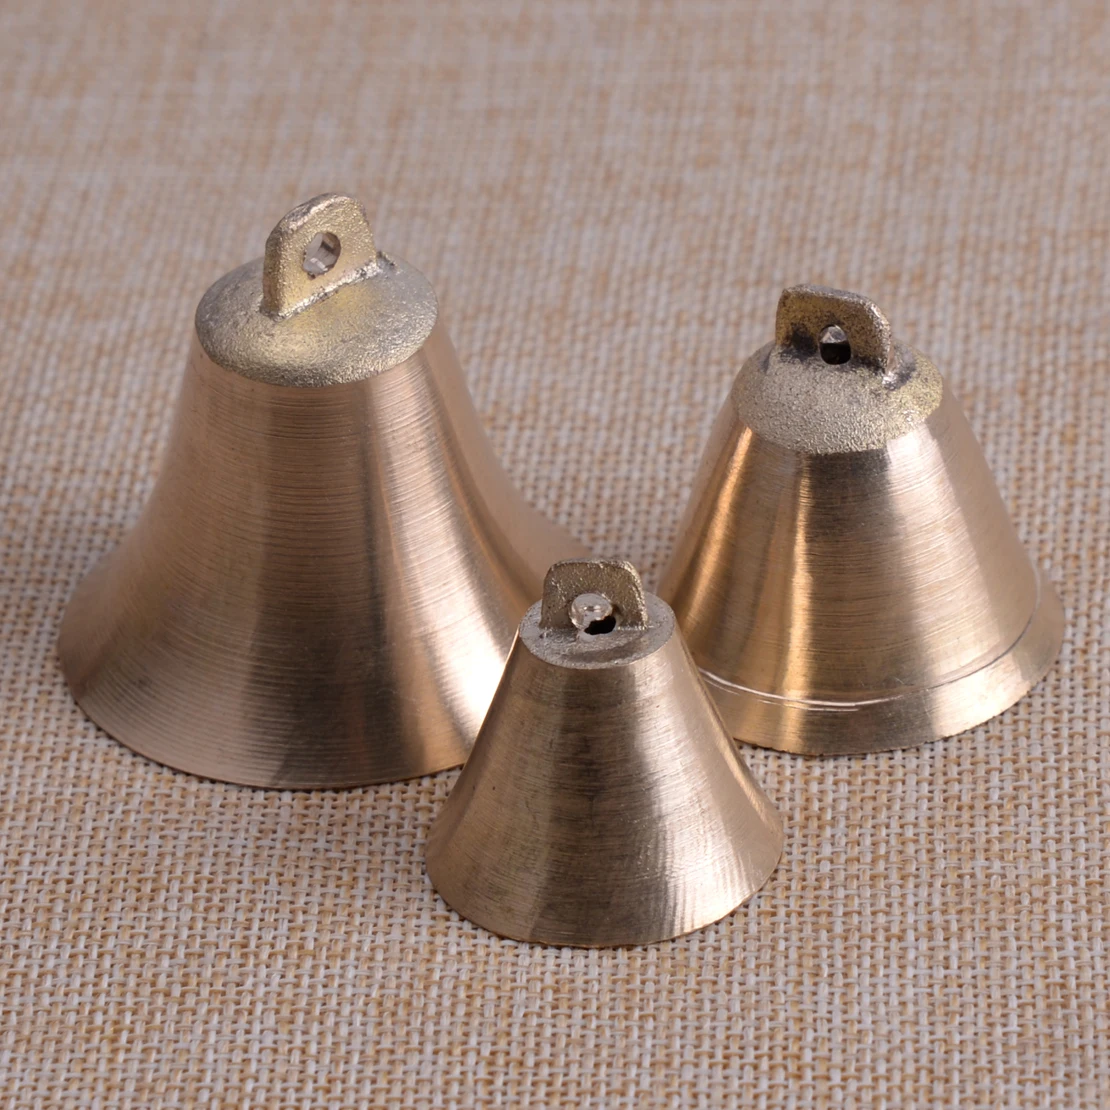 Super Loud Brass Pure Copper Bell for Cow Horse Sheep Dog Grazing Cattle Farm s 